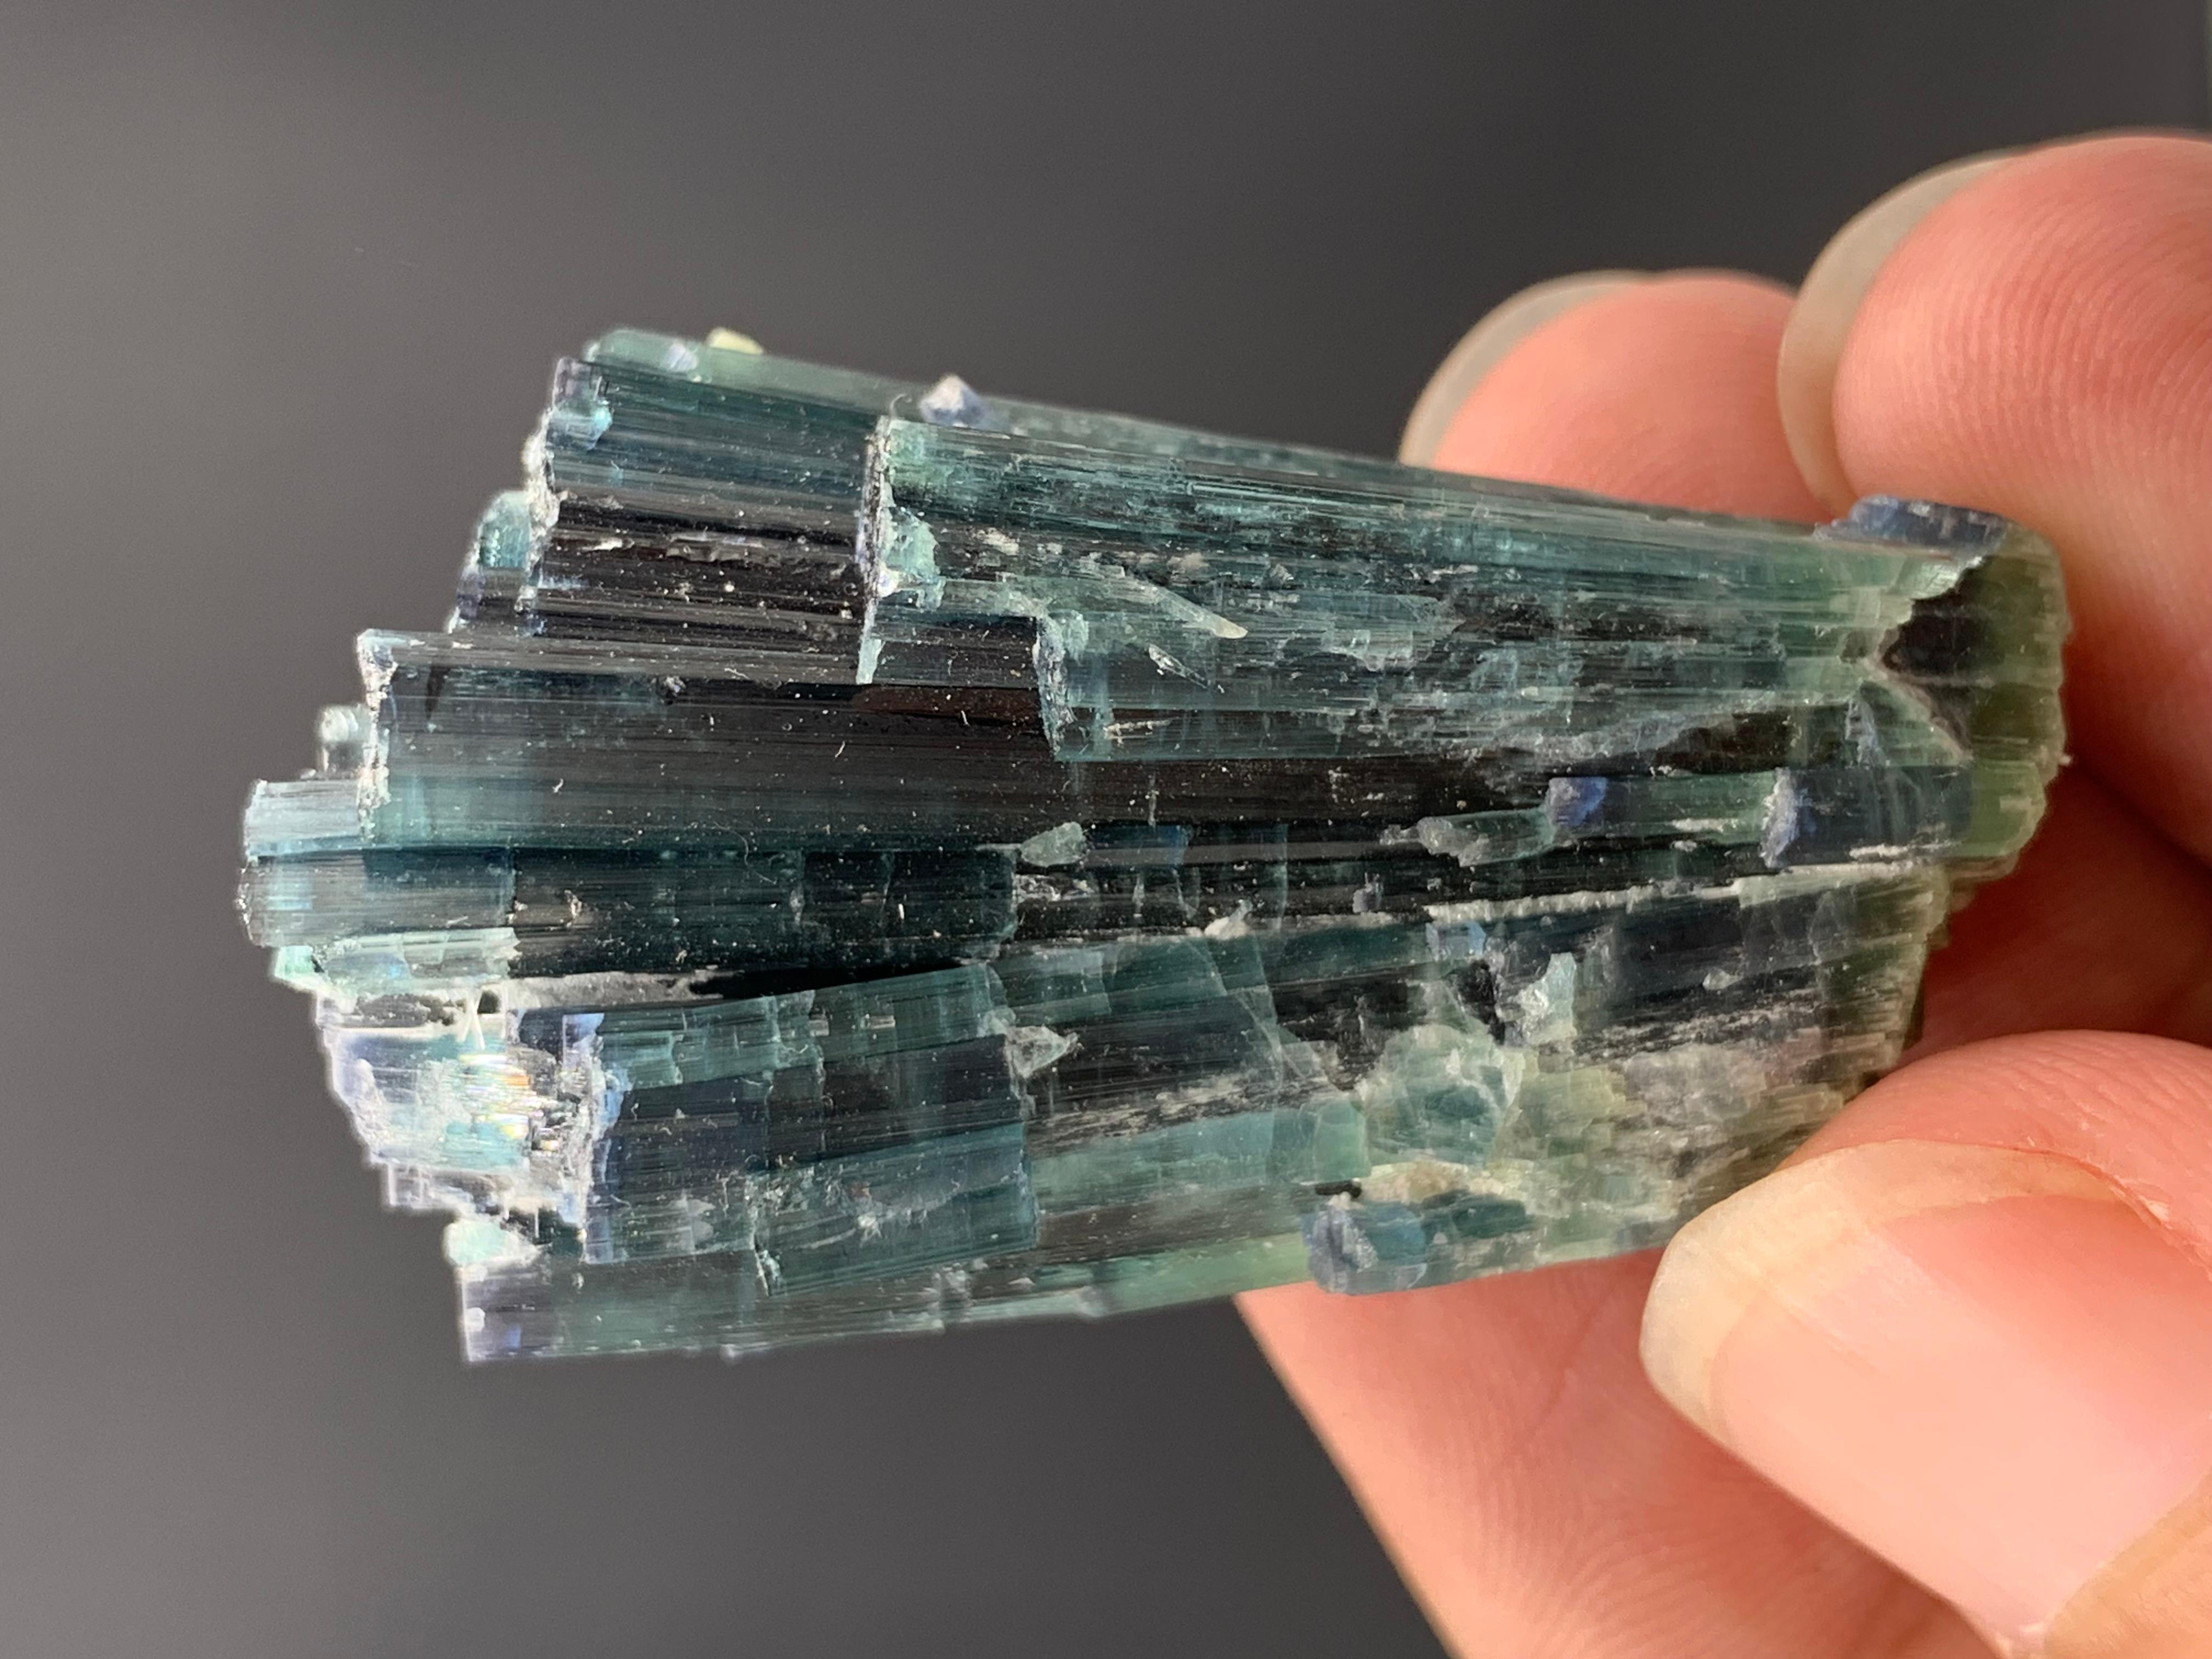 25.15 Gram Amazing Indicolite Blue Tourmaline Cluster From Kunar, Afghanistan 
Weight: 25.15 Gram 
Dimension : 4.4 x 2.6 x 1.4 cm
Origin: Kunar, Afghanistan 

Tourmaline is a crystalline silicate mineral group in which boron is compounded with